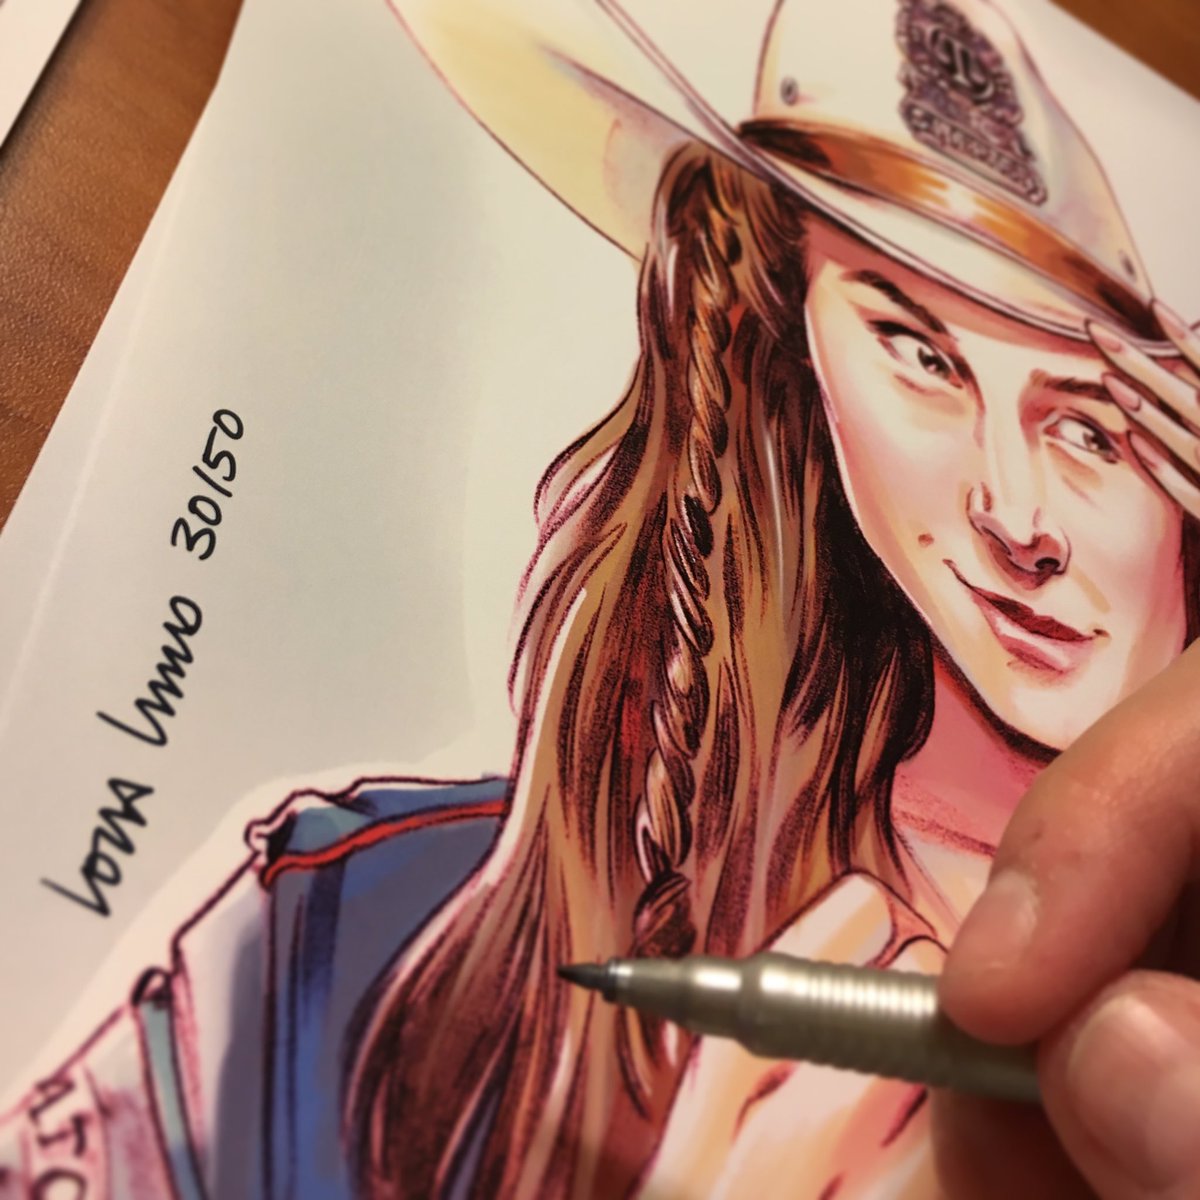 I decided since  @ClexaCon was a special show I’d do a limited edition  #WayHaught   print. Just for this one special weekend. I’d never done an exclusive print. Hoped it would do ok... you crazy fools. I had no idea.